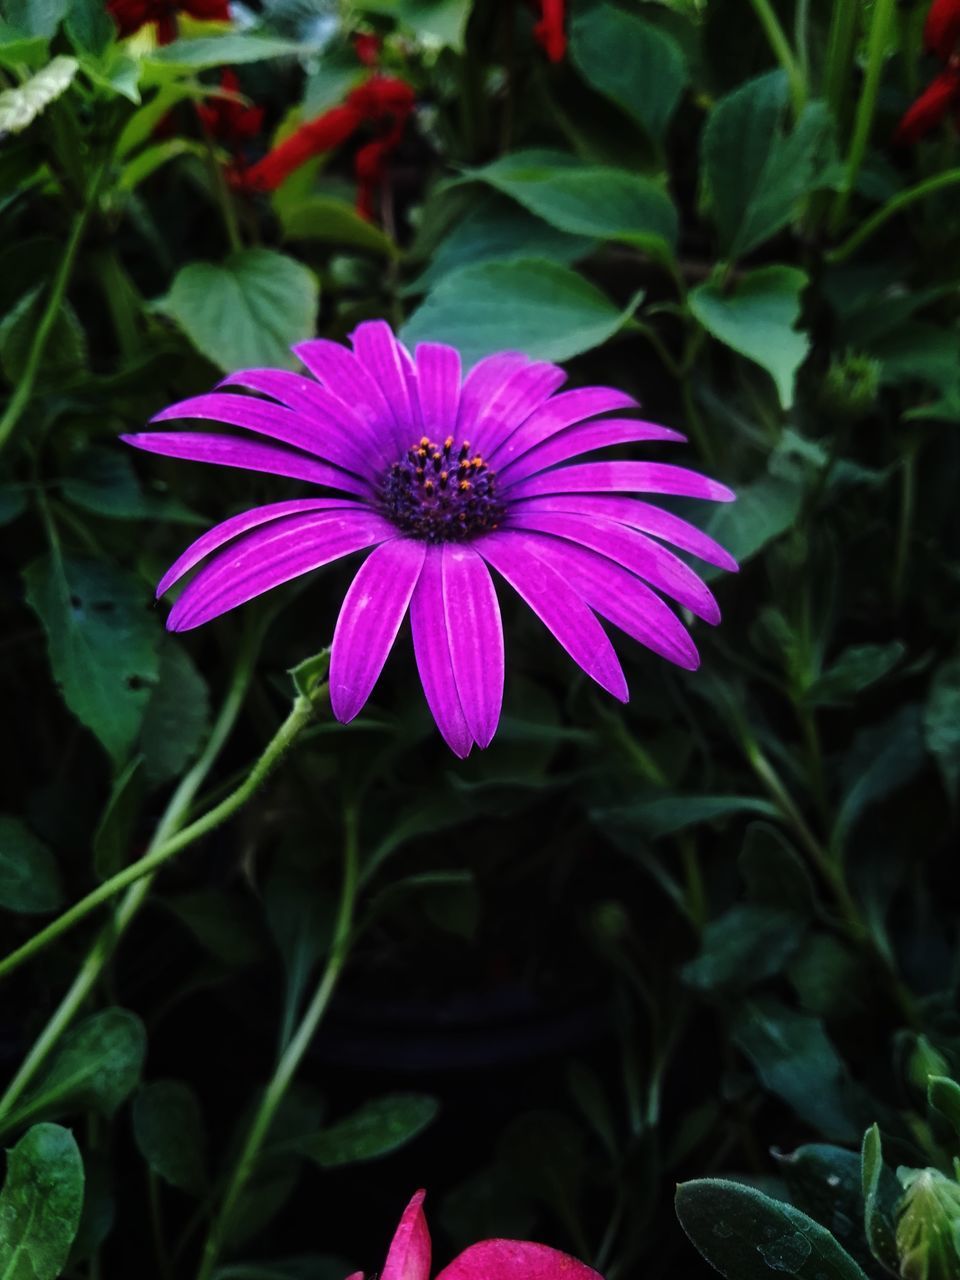 flowering plant, flower, petal, plant, fragility, freshness, vulnerability, flower head, beauty in nature, inflorescence, growth, close-up, purple, pink color, osteospermum, nature, pollen, focus on foreground, no people